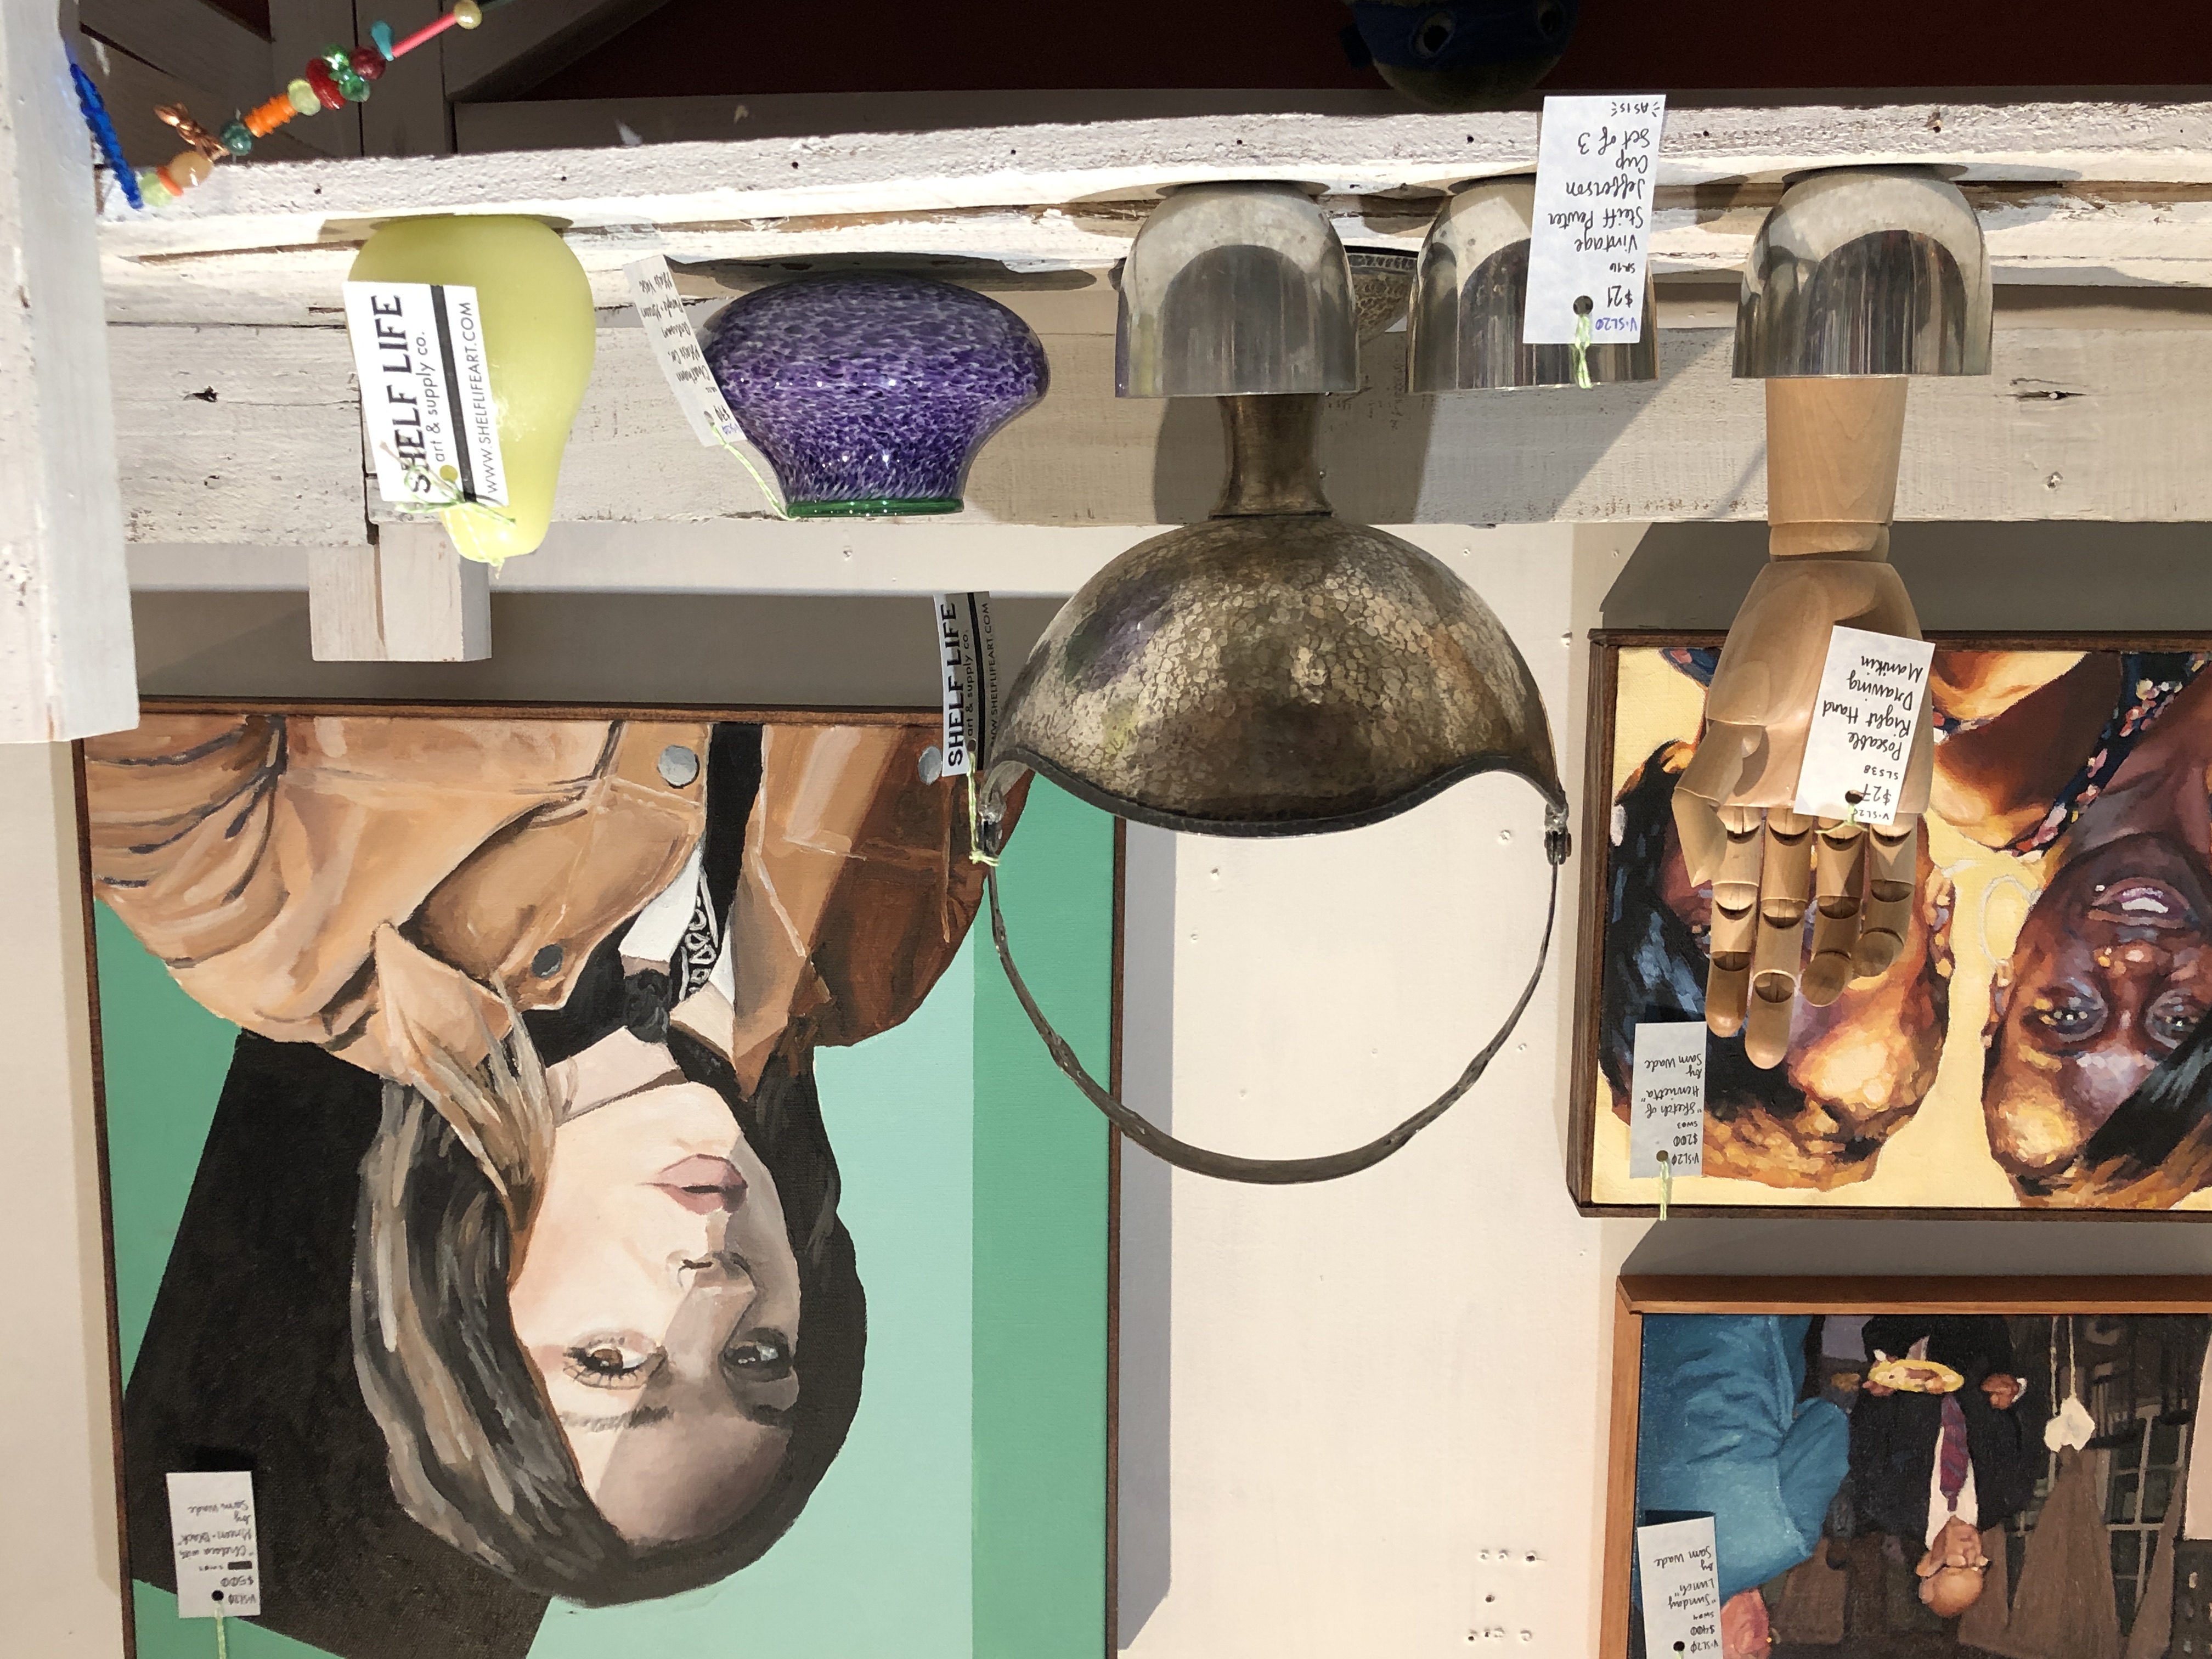 Oil portraits by Sam Wade, poseable right hand drawing manikin, vintage Steiff Pewter Jefferson cups, vintage silver basket, handblown glass bowl, and boutique green pear candle at Shelf Life Satellite.